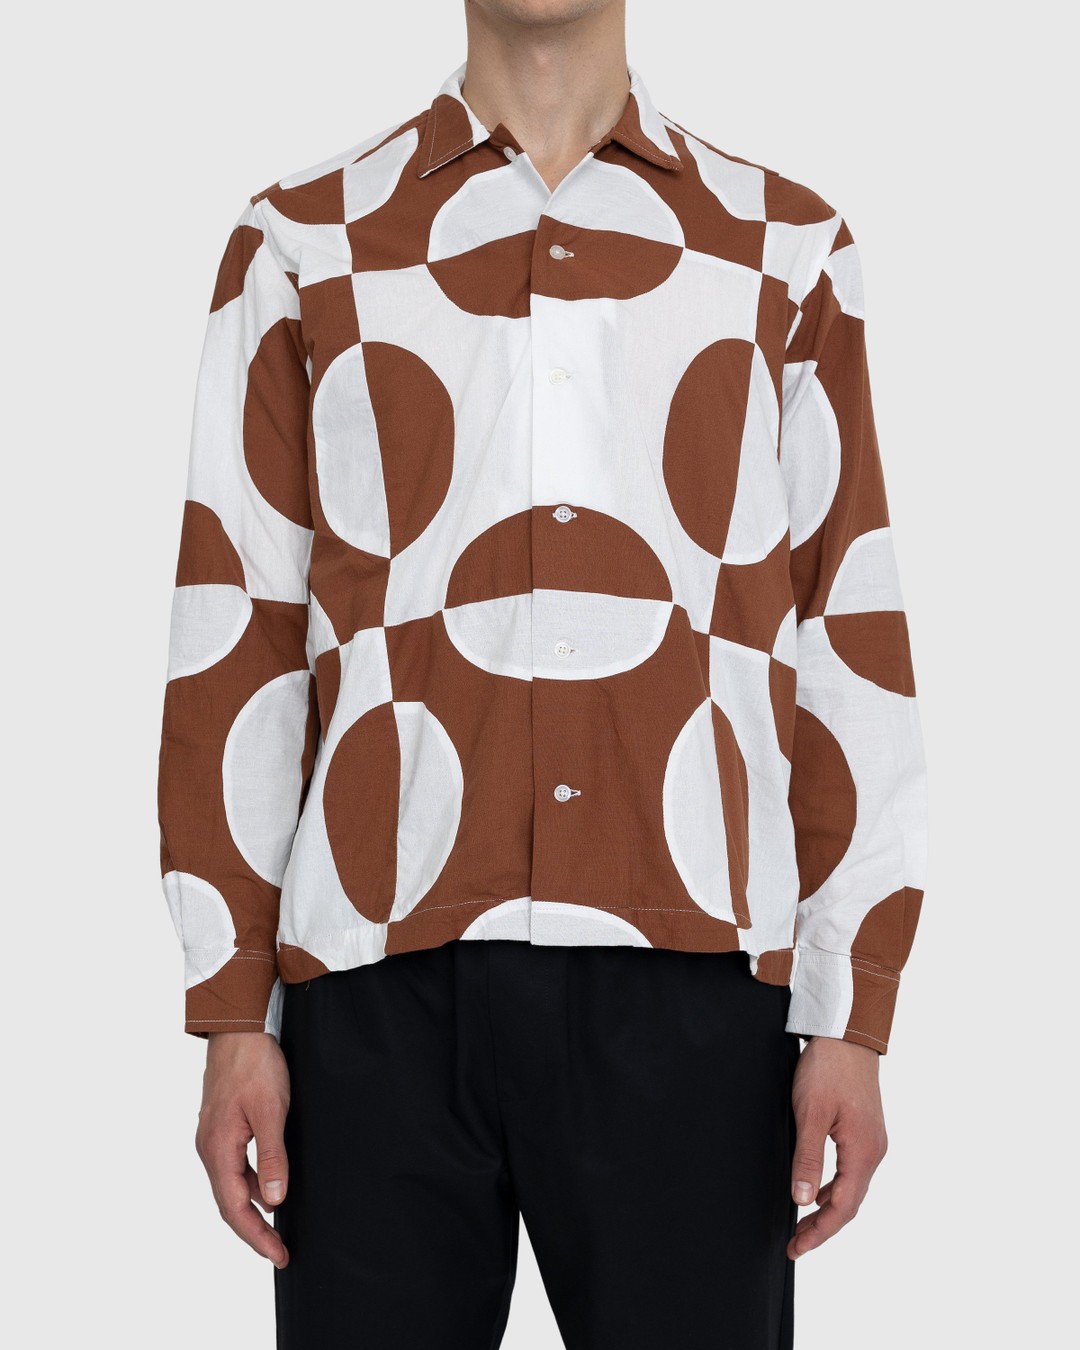 Bode – Duo Oval Patchwork Long-Sleeve Shirt Brown - Longsleeve Shirts - Multi - Image 2